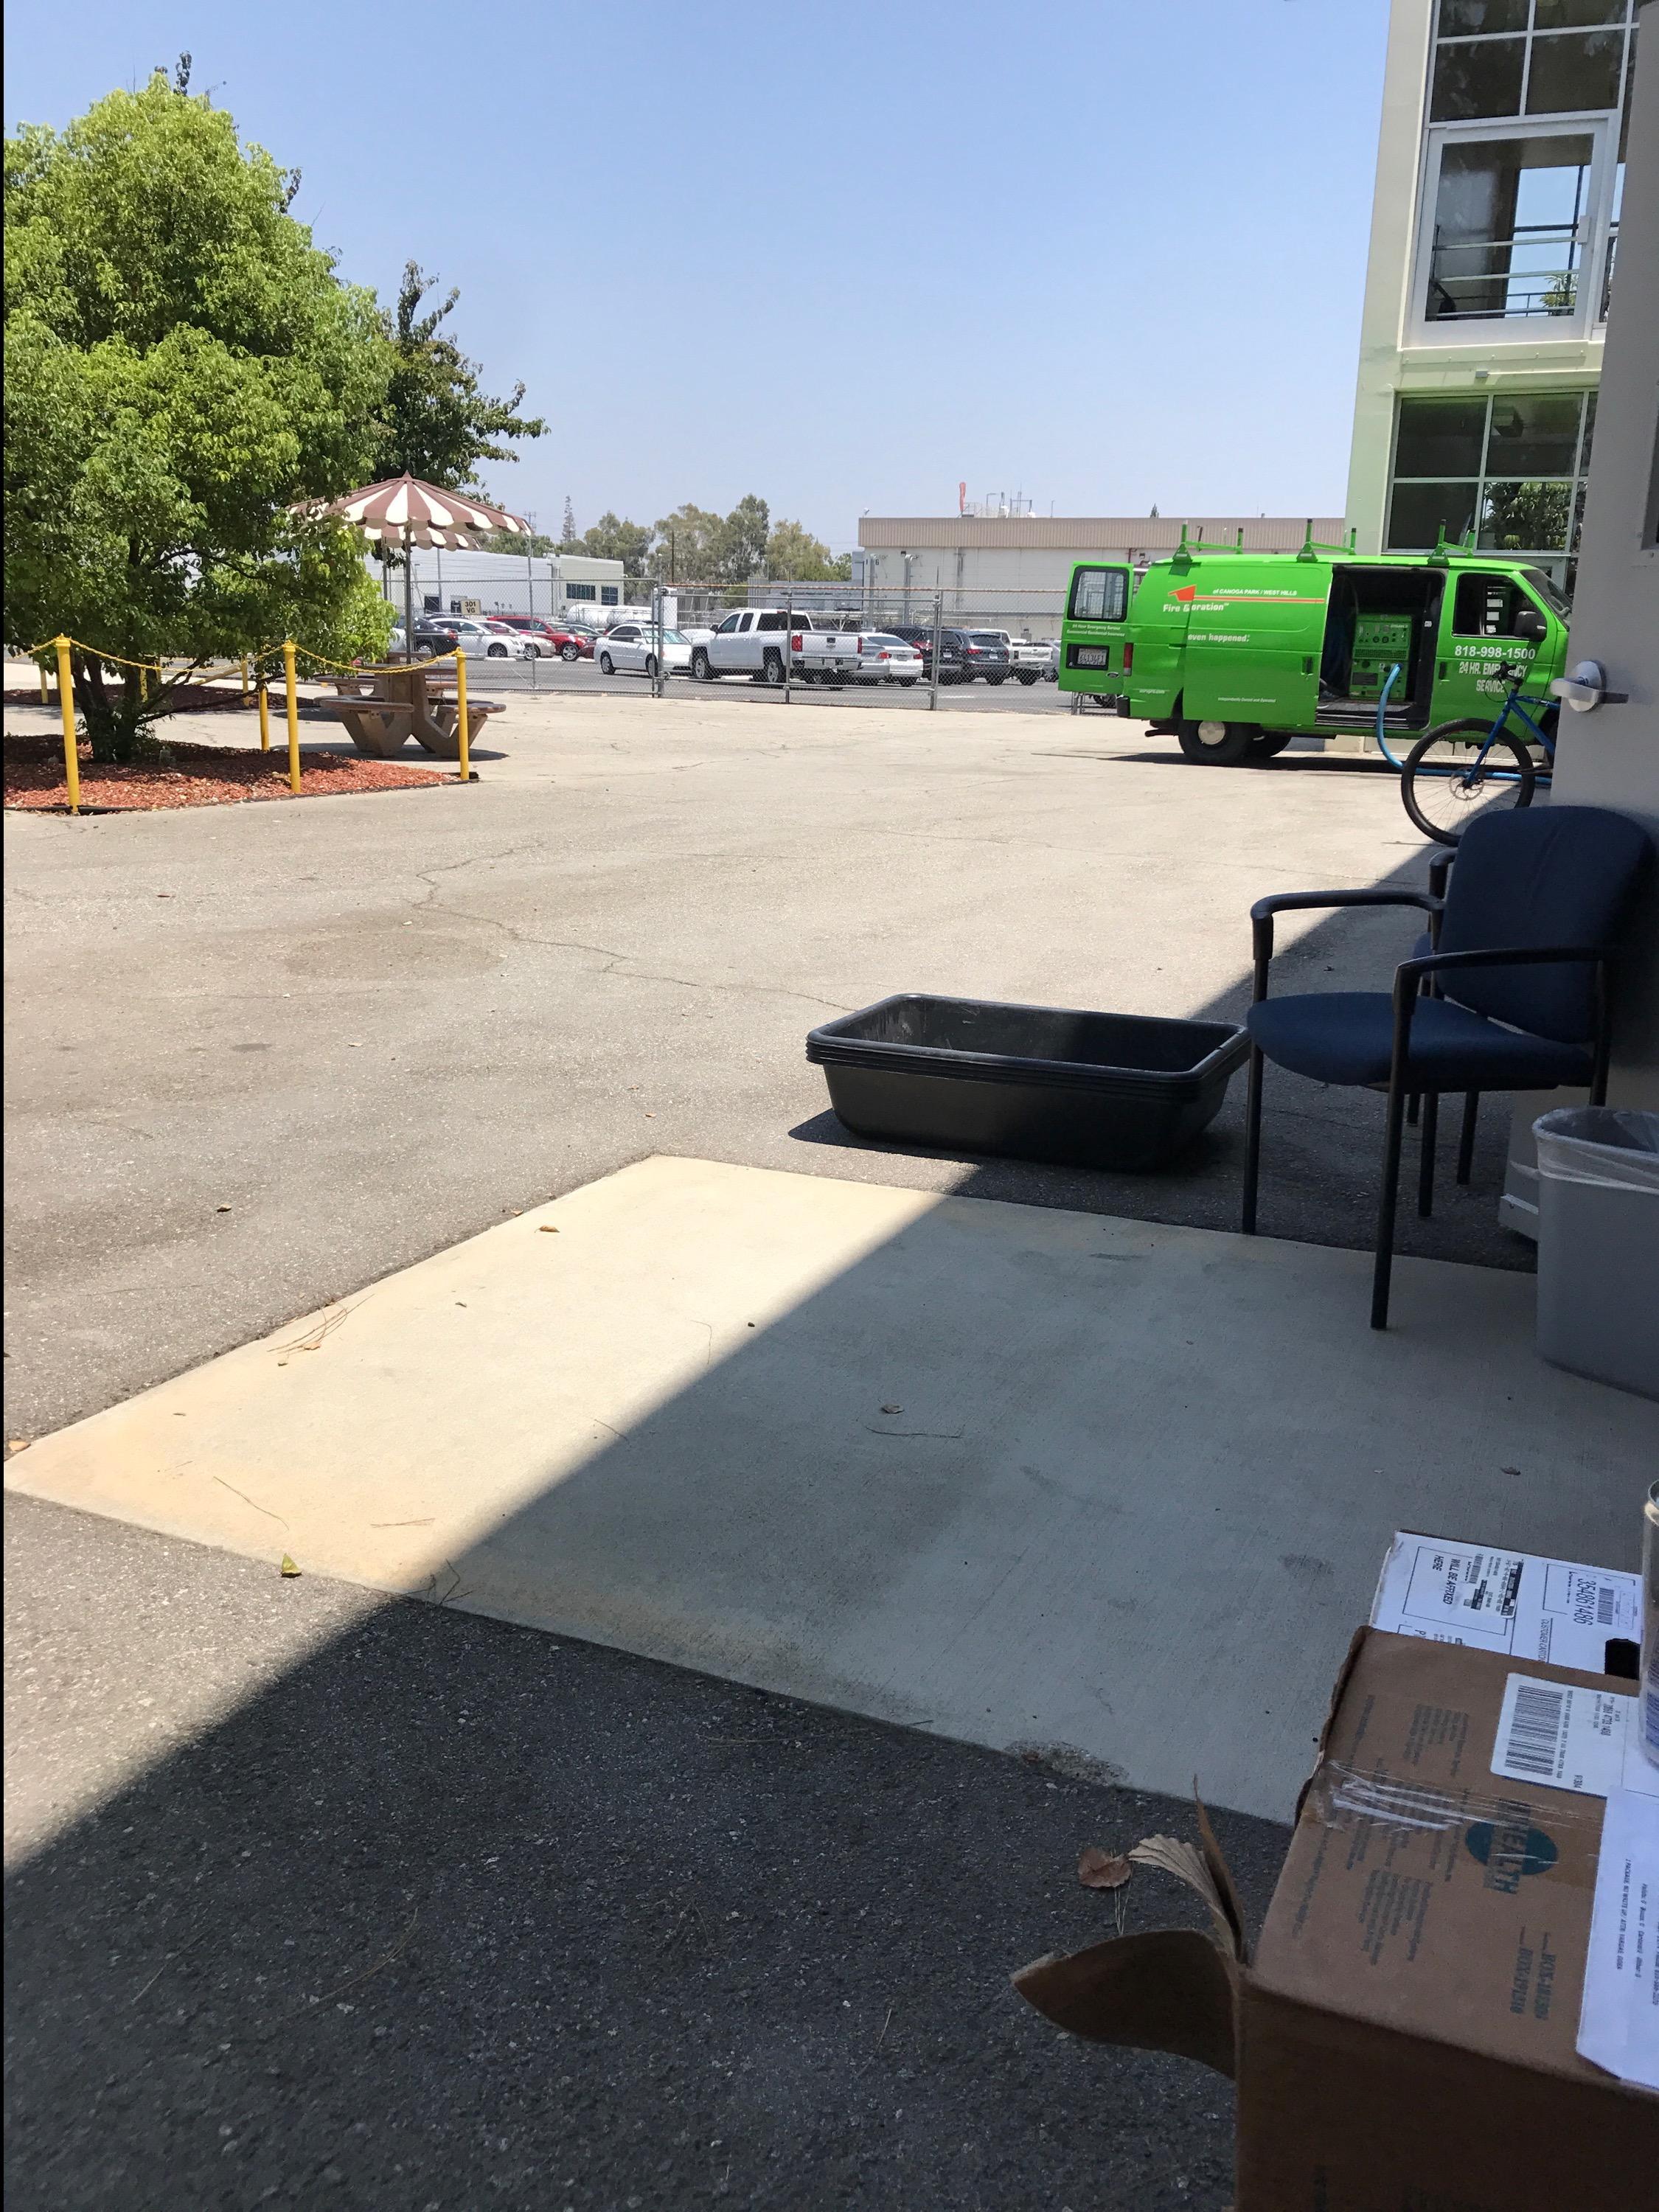 A truck mounted extractor was used by SERVPRO of Canoga Park / West hills to aid in the removal of the water damage to this office in Canoga Park.